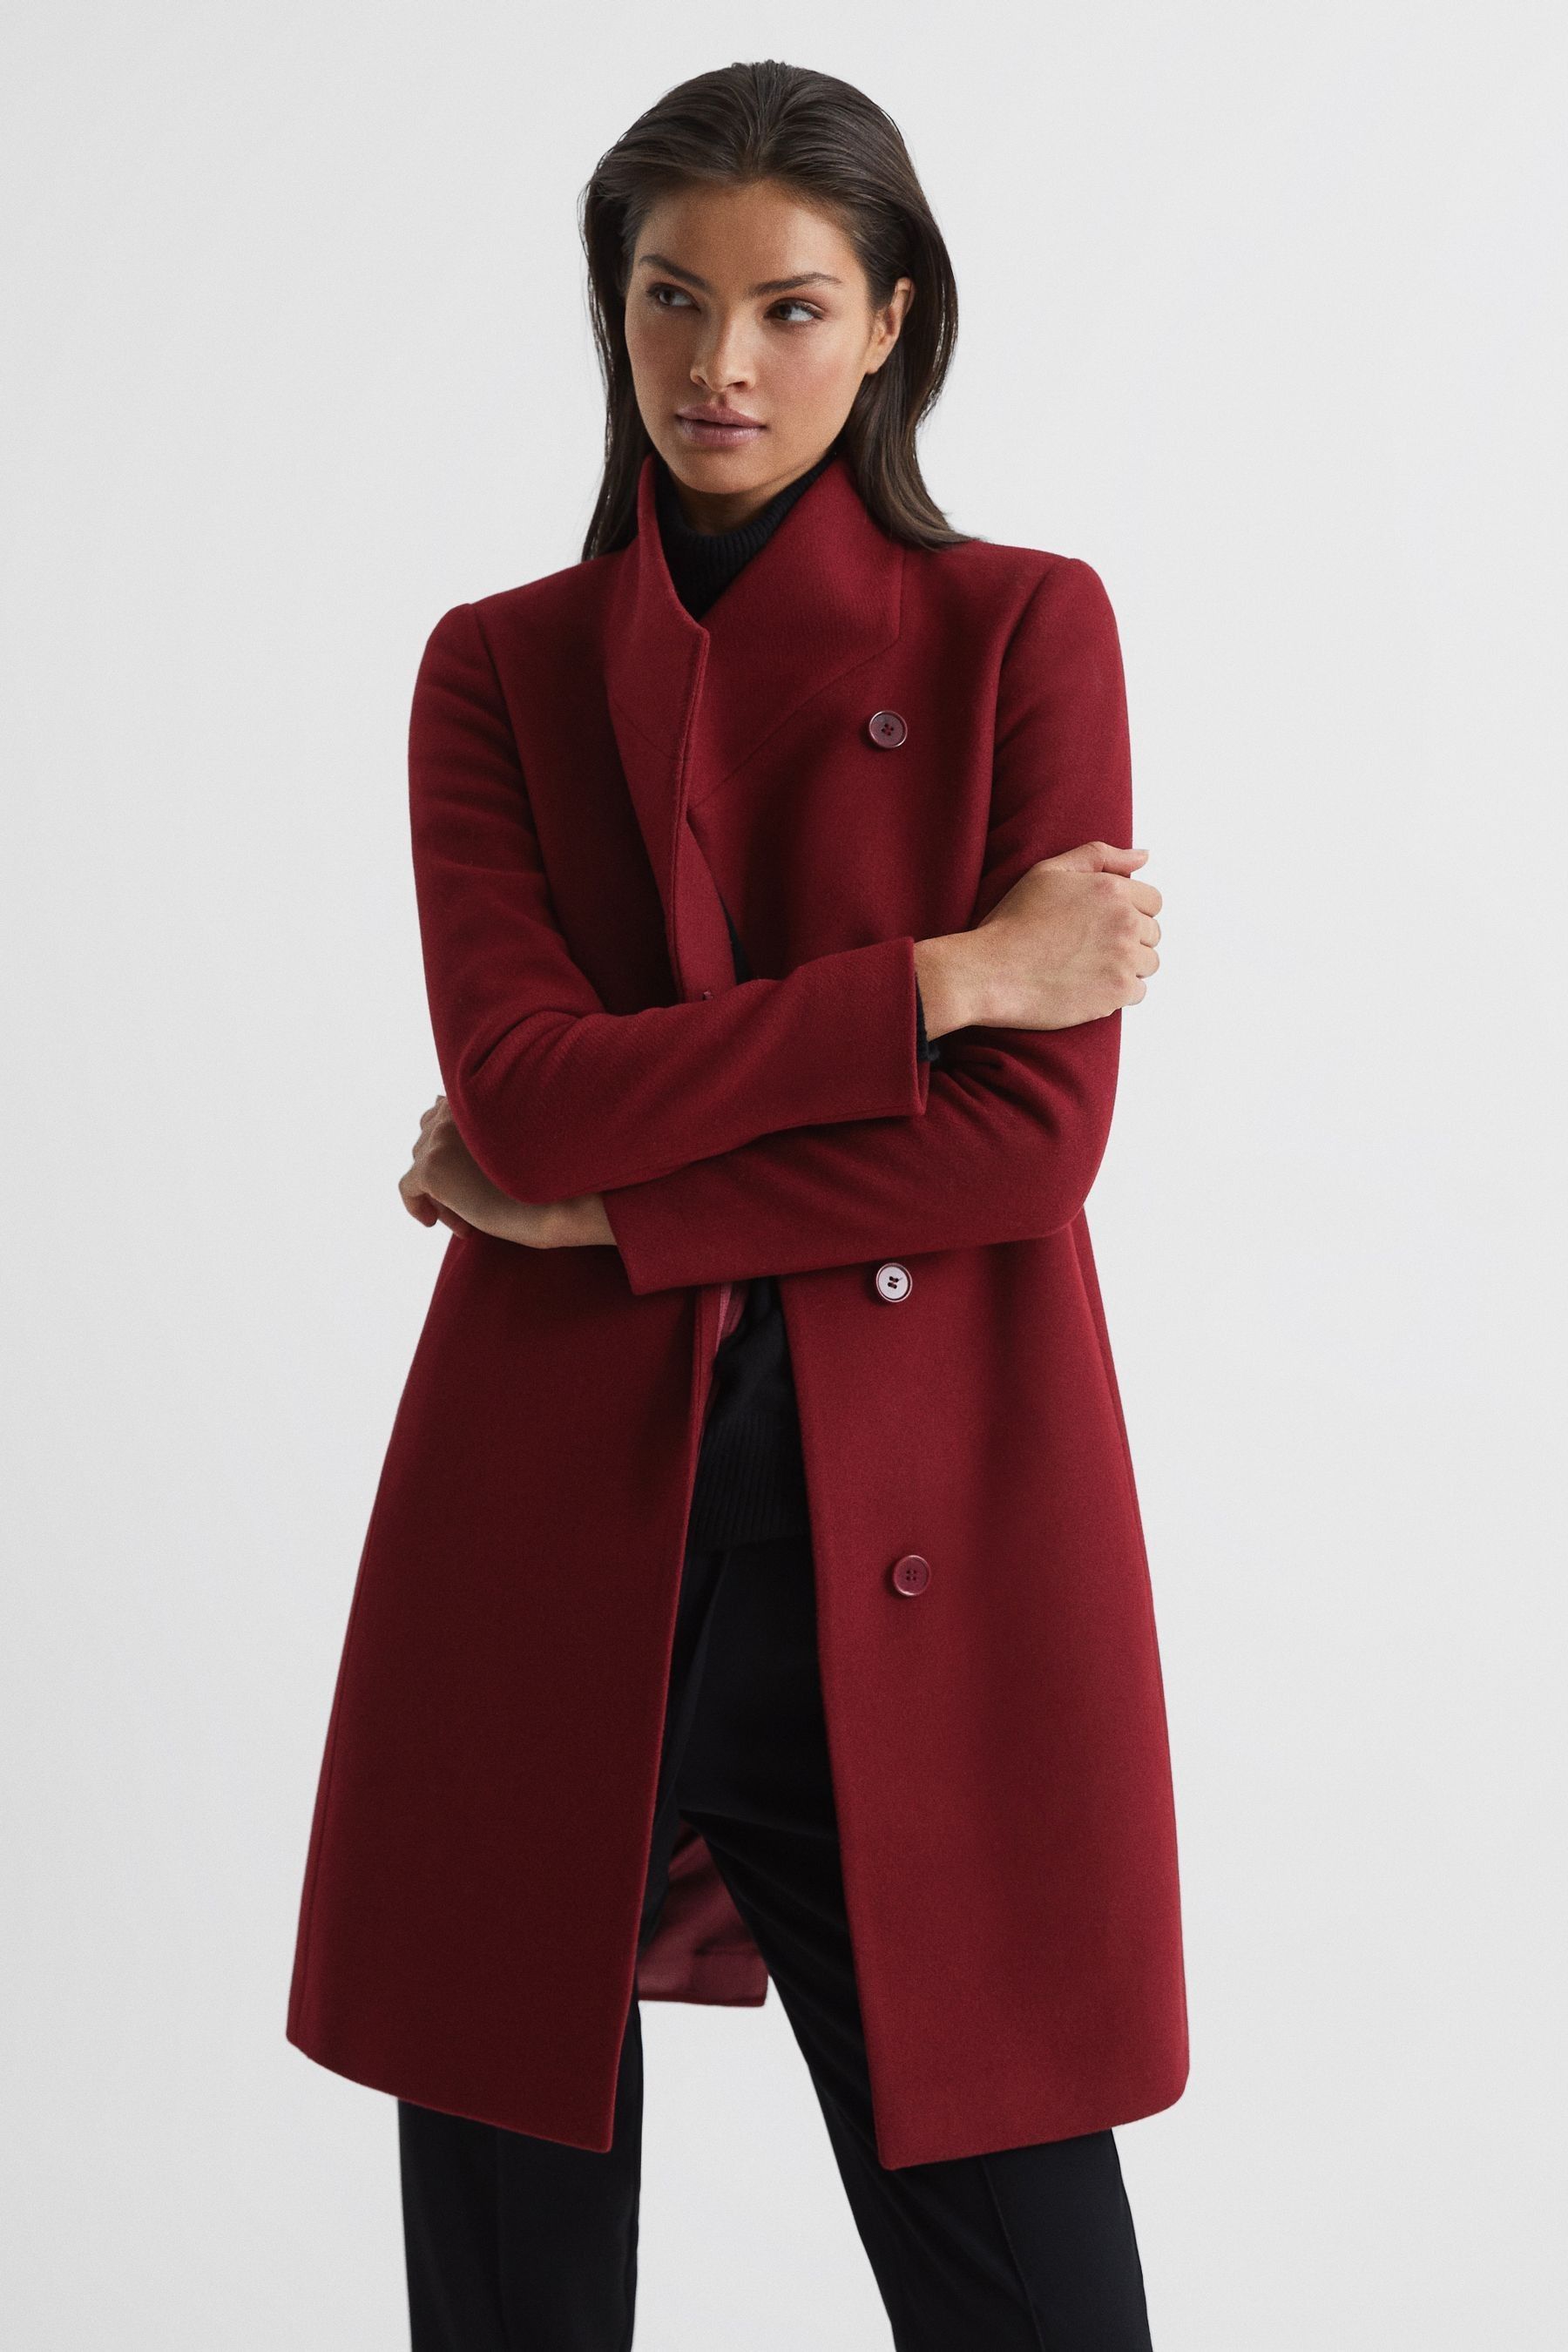 Buy Reiss Red Mia Wool Blend Mid-Length Coat from the Next UK online shop